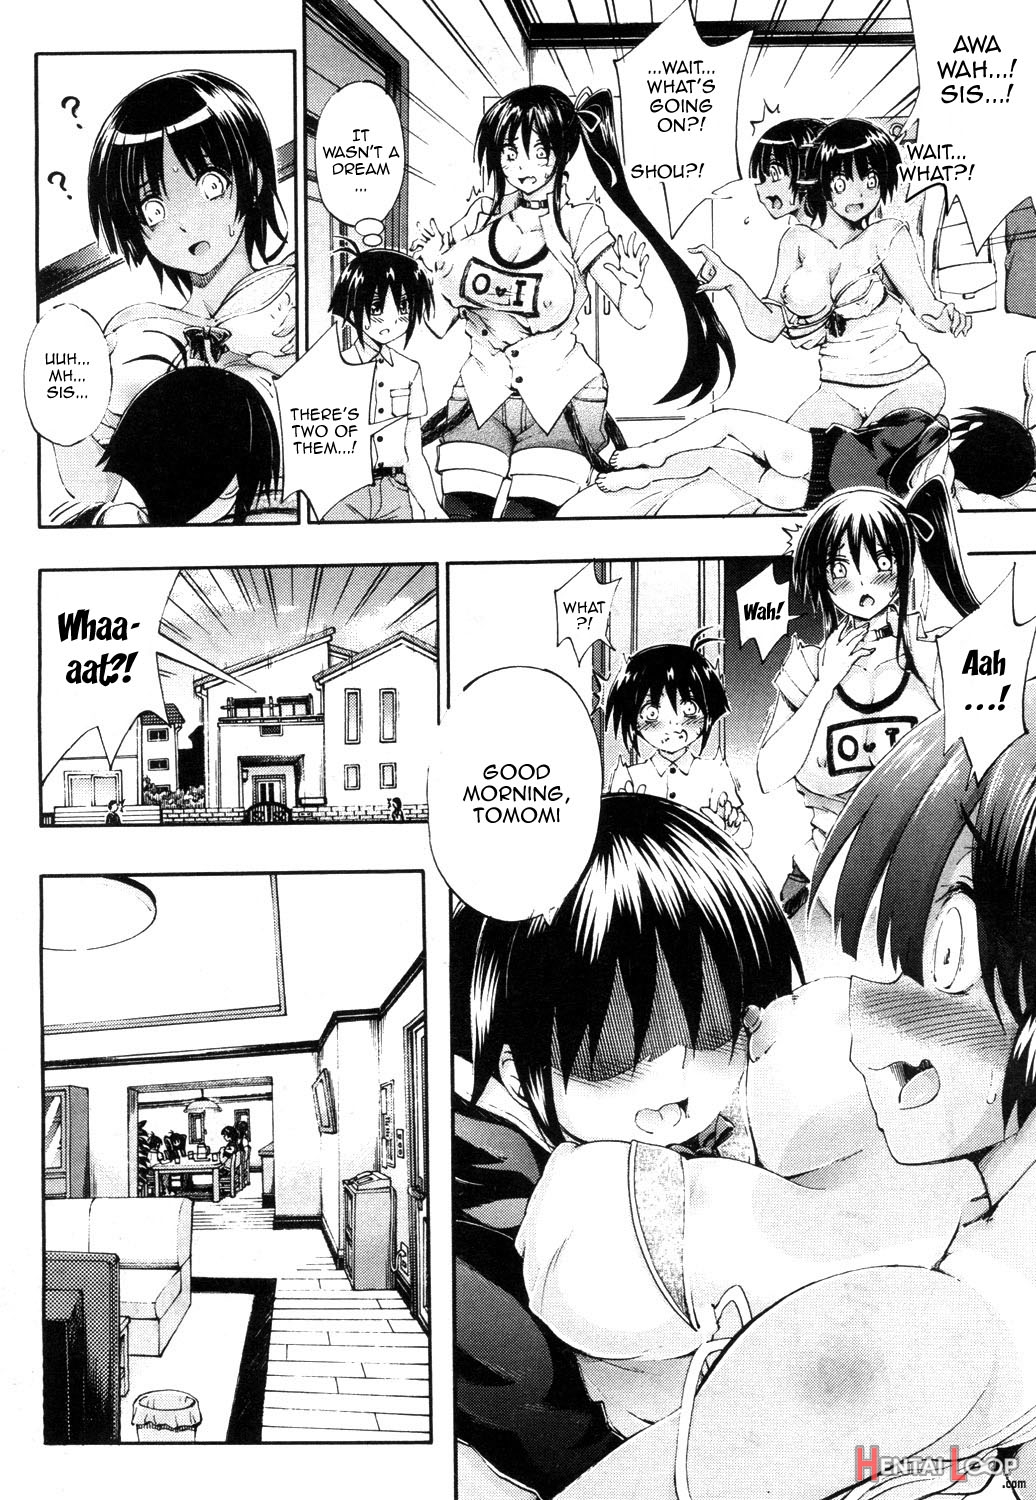 My Doppelganger Wants To Have Sex With My Older Sister Ch. 2 page 4